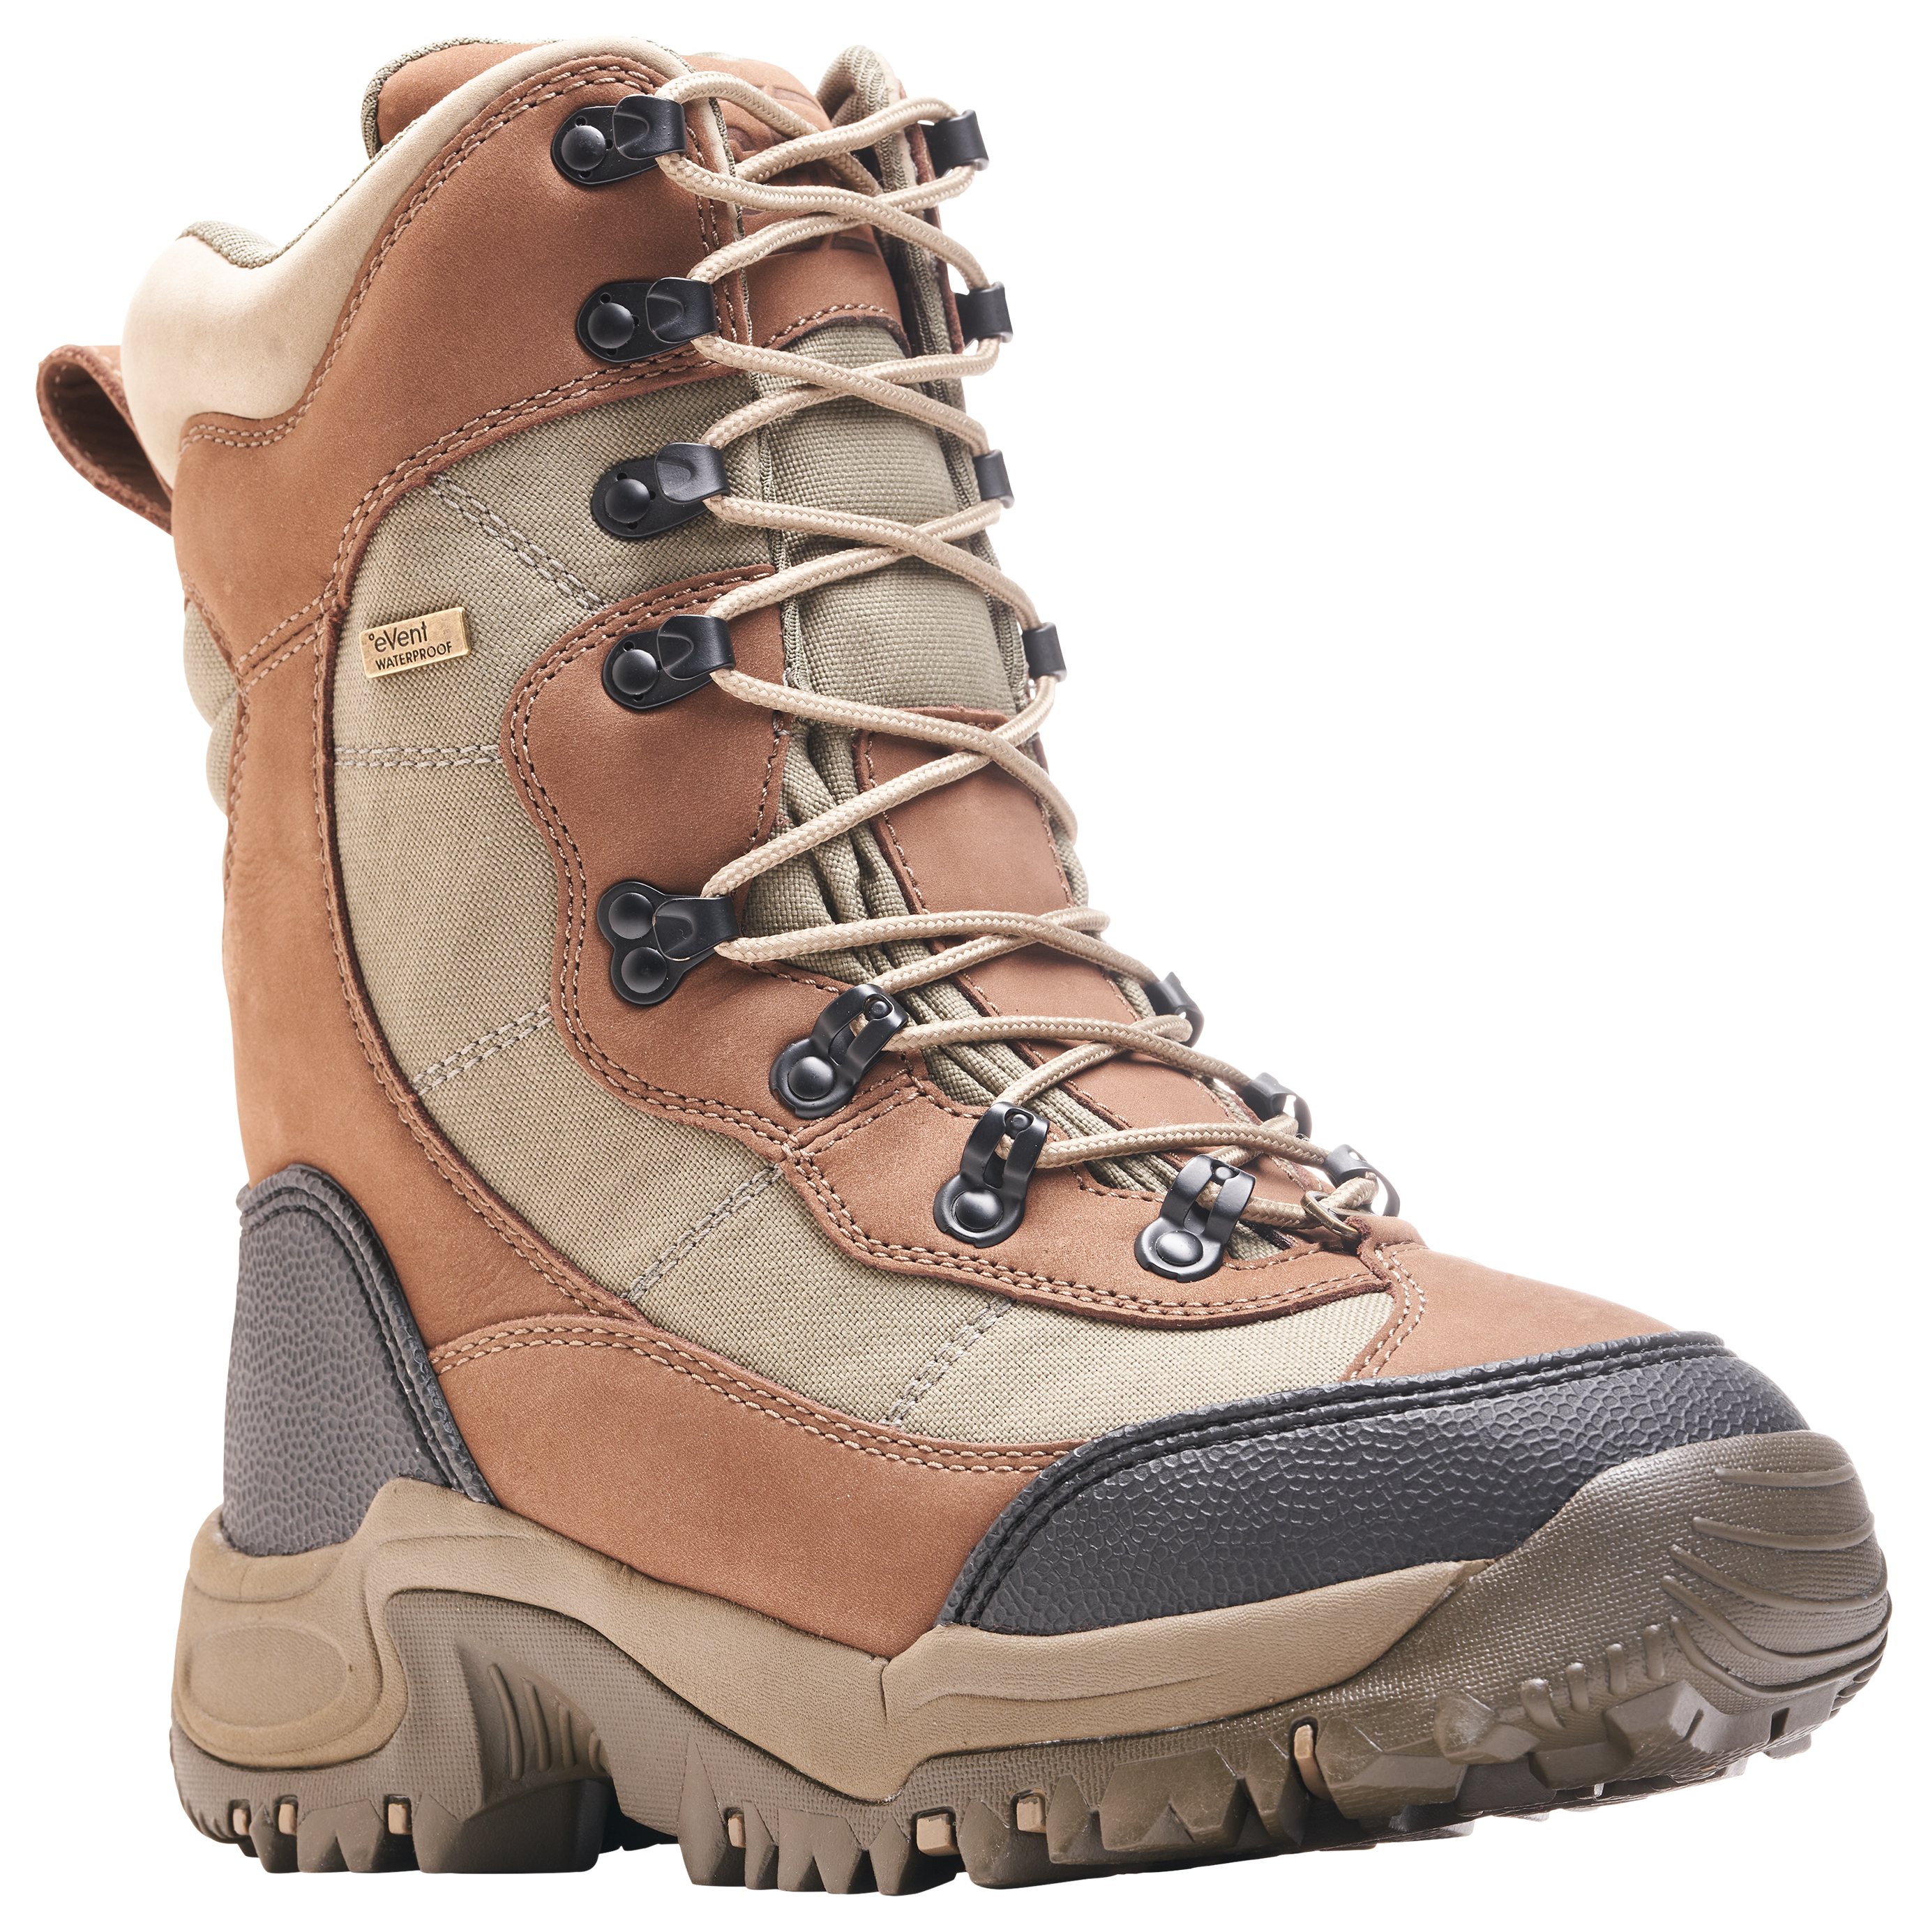 SHE Outdoor Inferno II Insulated Waterproof Hunting Boots for Ladies - Brown - 9M